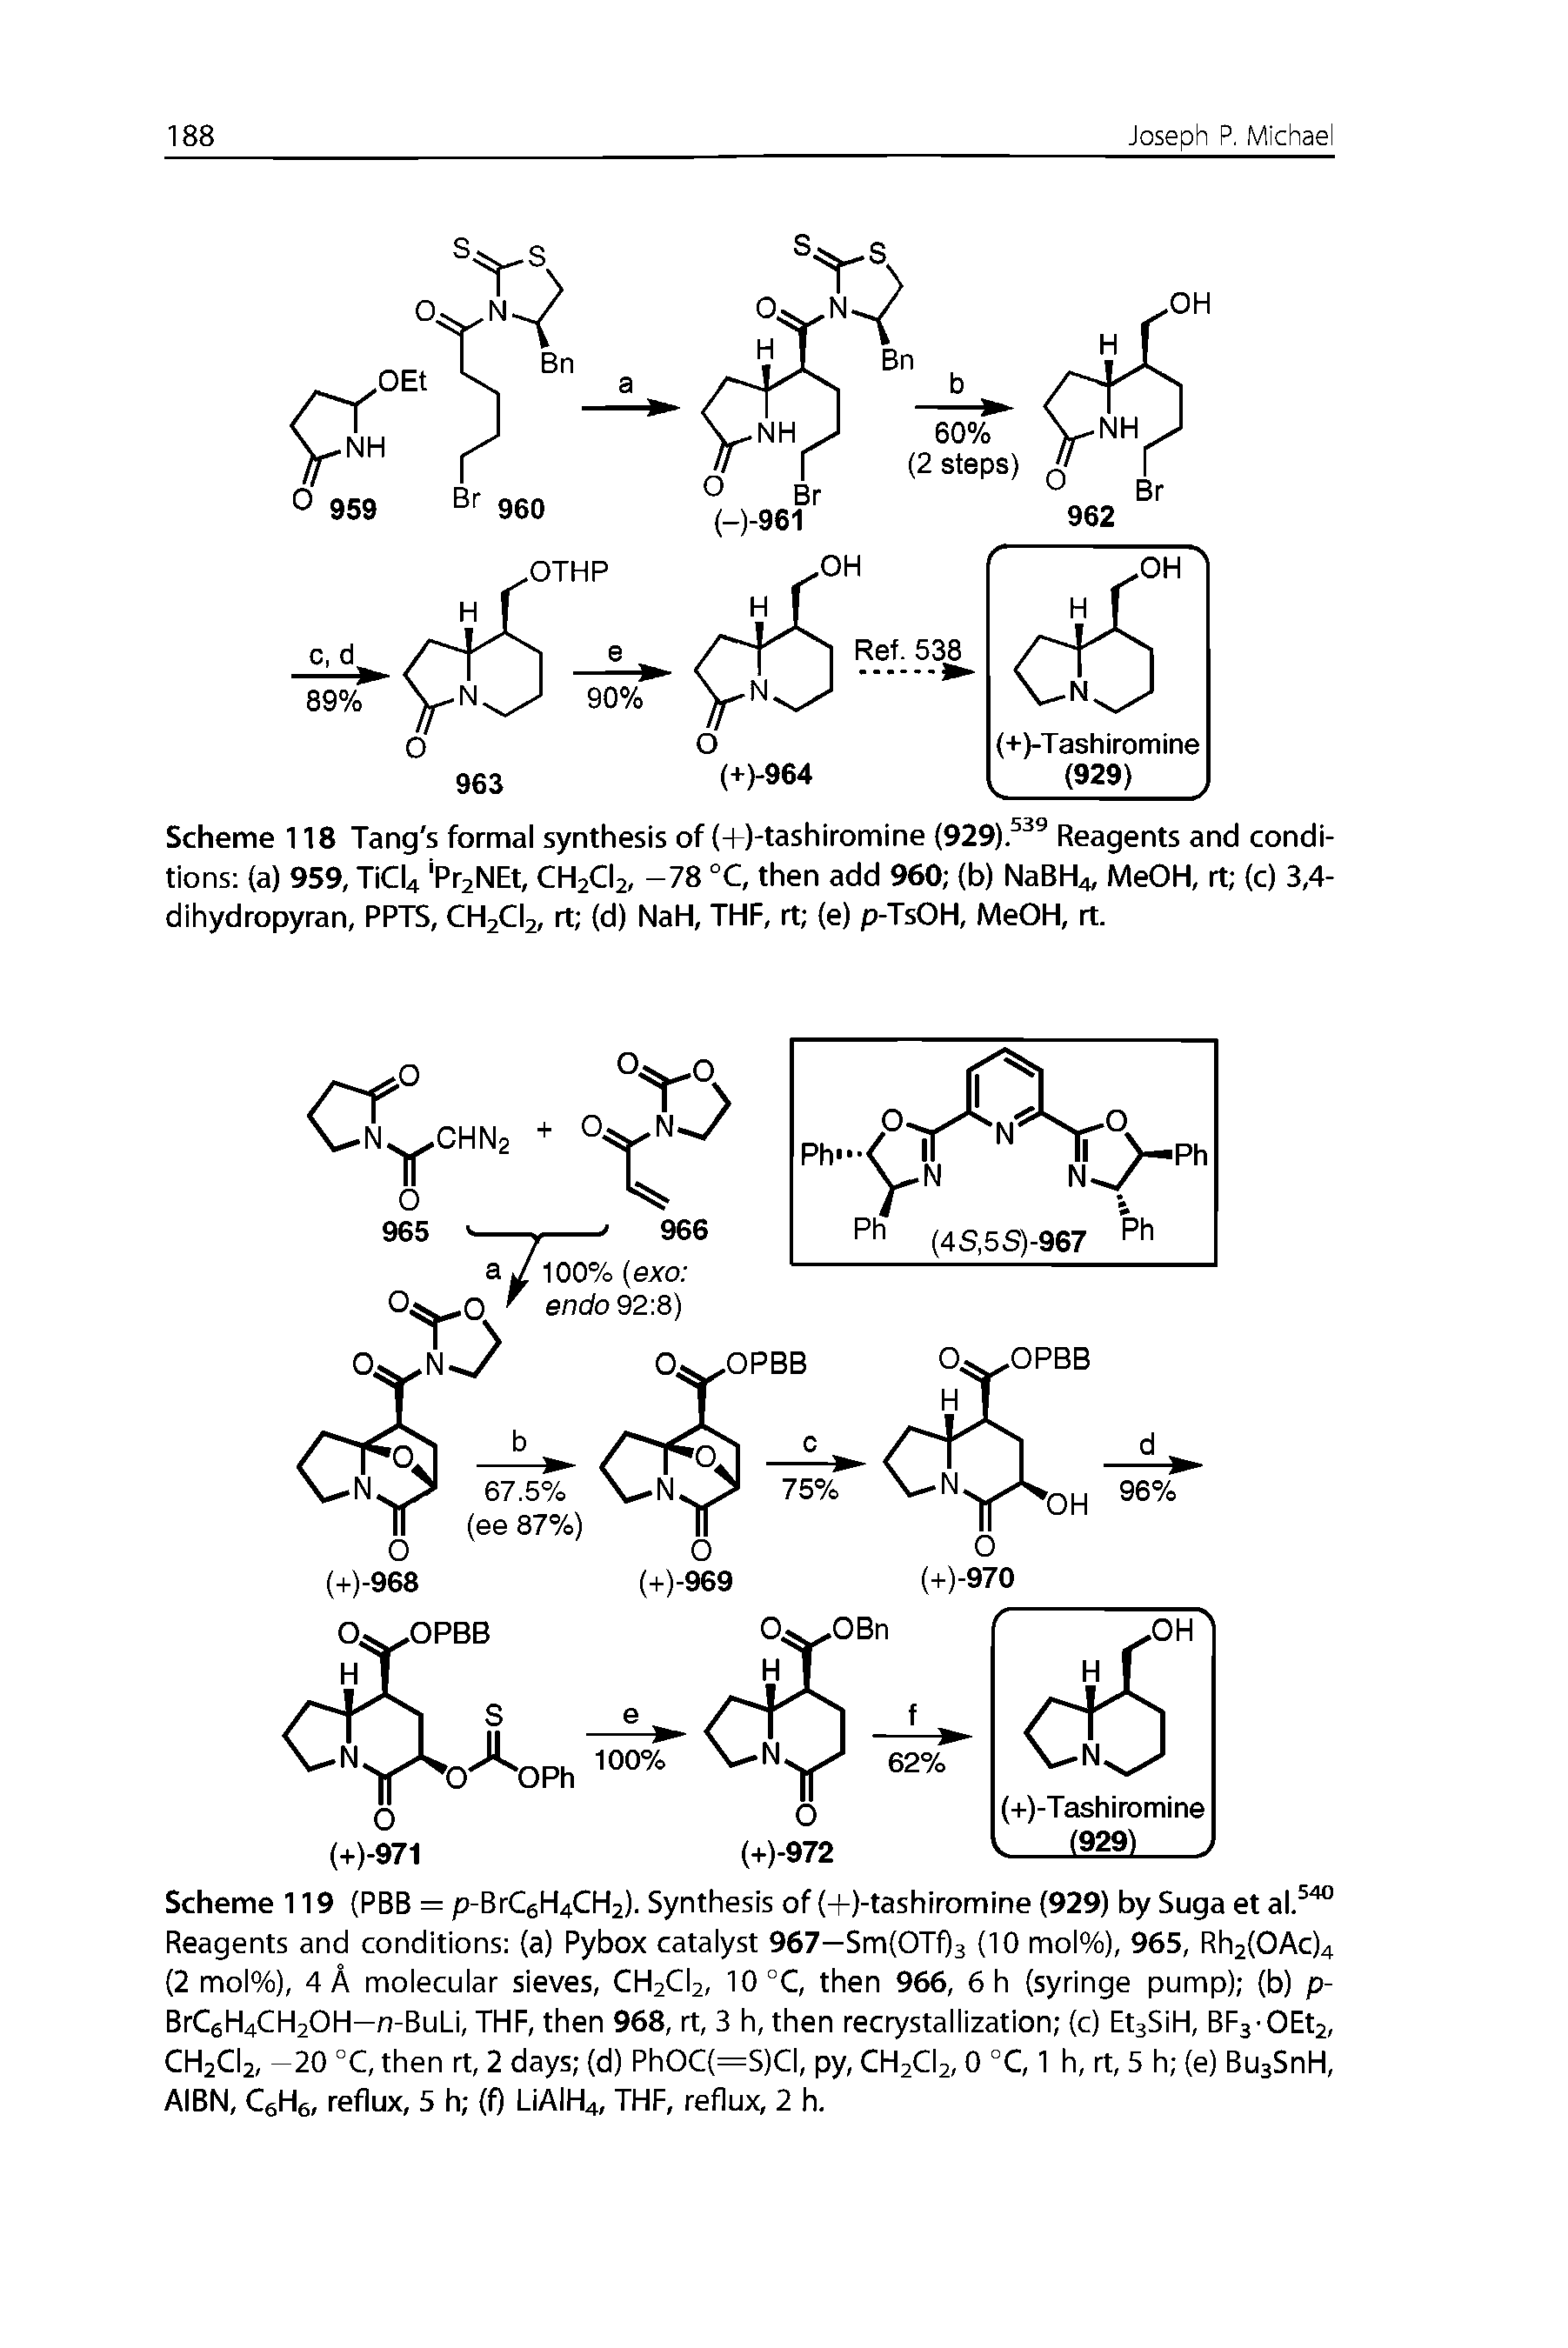 Scheme 119 (PBB = p-BrCgH4CH2). Synthesis of (-t-)-tashiromine (929) by Suga et al. Reagents and conditions (a) Pybox catalyst 967—Sm(OTf)3 (10 mol%), 965, Rh2(OAc)4 (2 mol%), 4 A molecular sieves, CH2CI2, 10 °C, then 966, 6h (syringe pump) (b) p-BrCgH4CH20H—n-BuLi, THF, then 968, rt, 3 h, then recrystallization (c) EtsSiH, BF3-OEt2, CH2CI2, -20 °C, then rt, 2 days (d) PhOC(=S)CI, py, CH2CI2, 0 °C, 1 h, rt, 5 h (e) BusSnH, AIBN, CgHs, reflux, 5 h (f) LIAIH4, THF, reflux, 2 h.